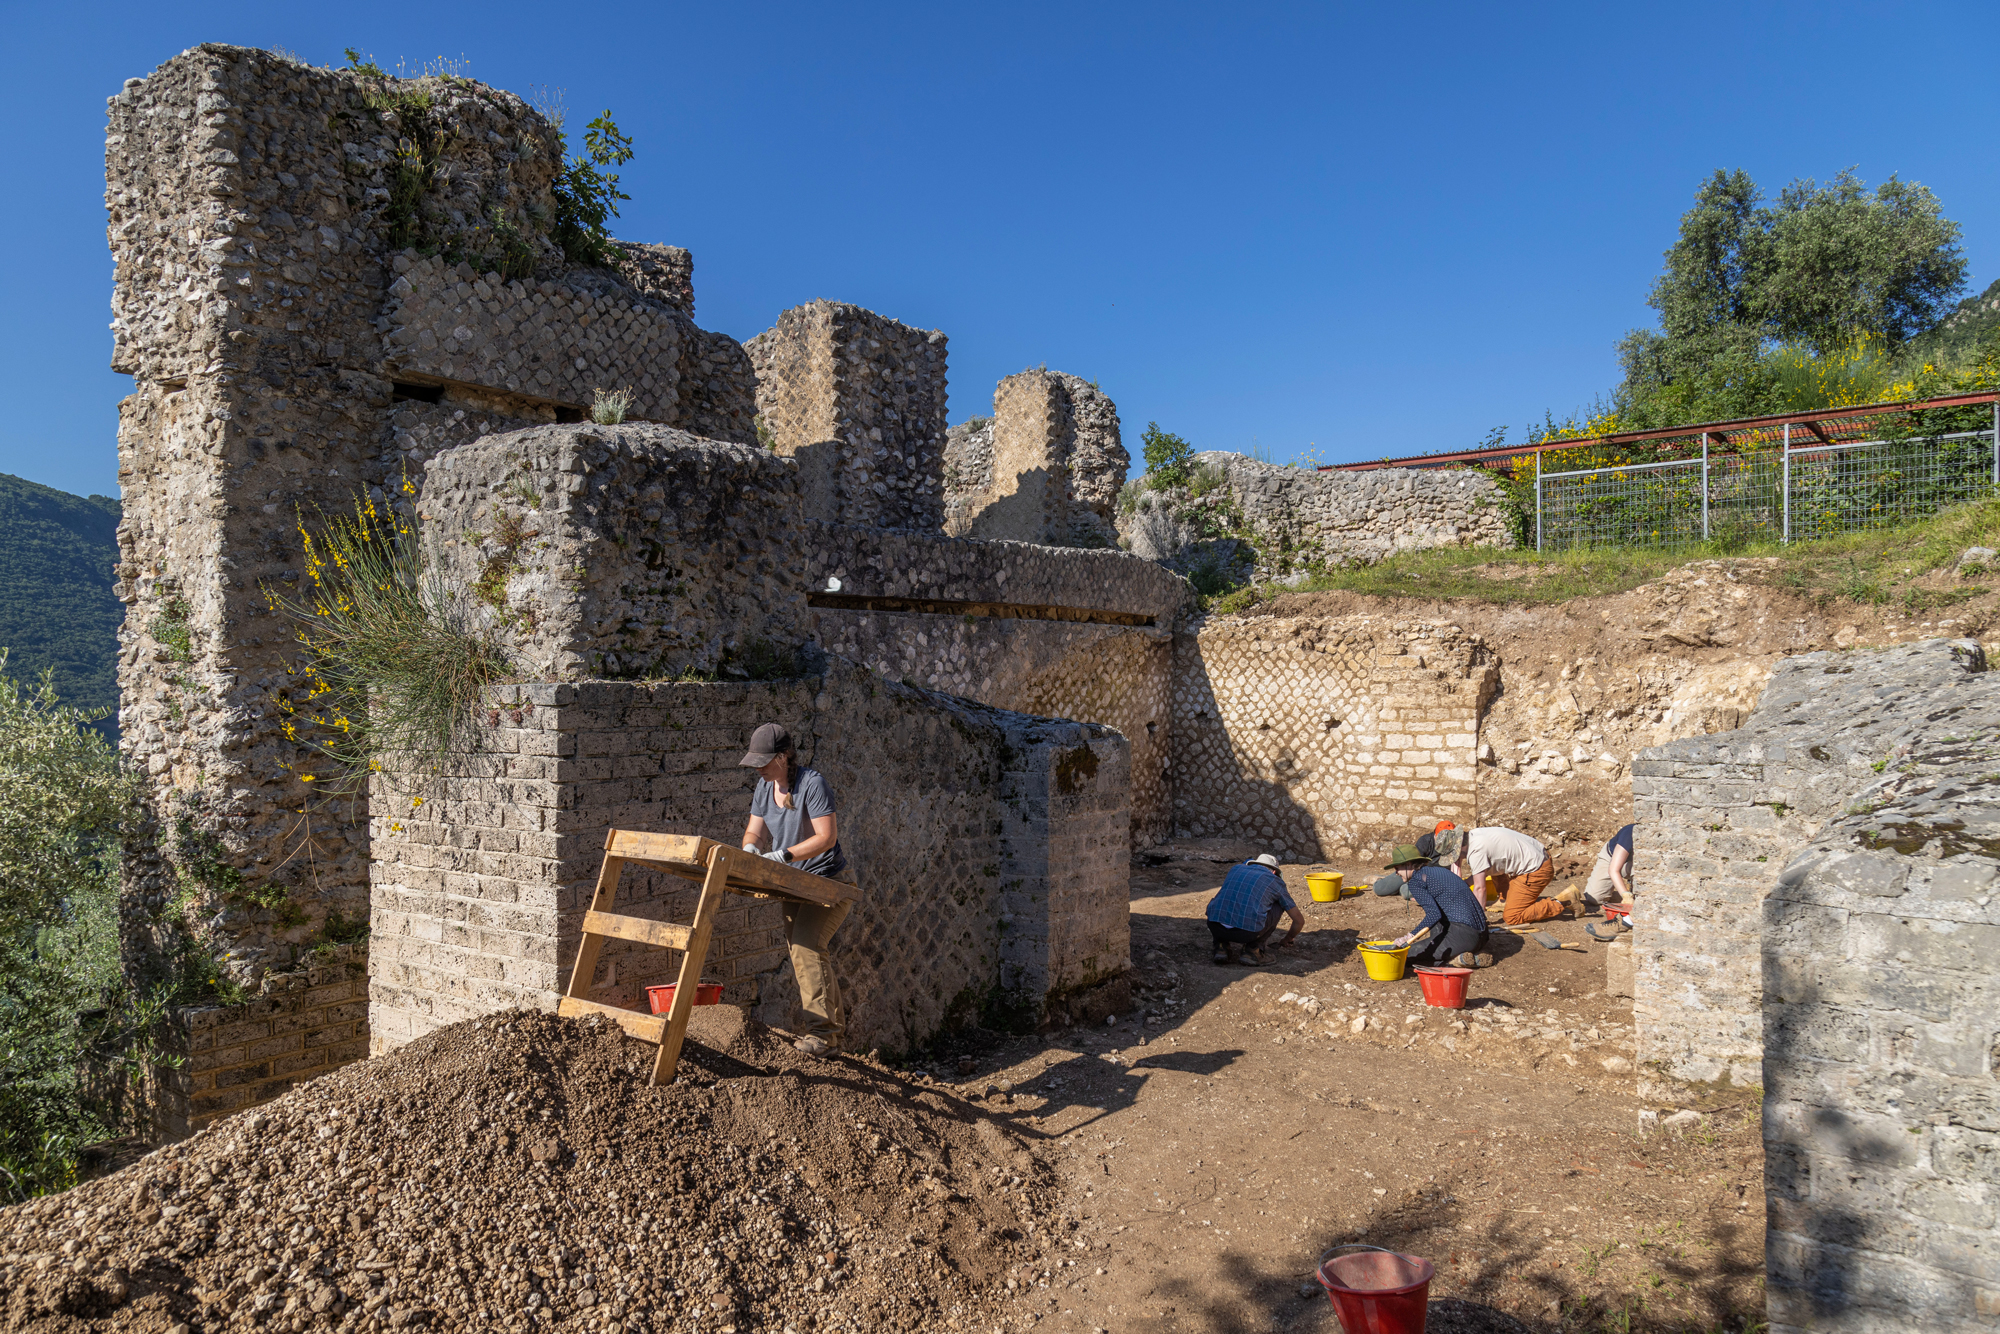 A group of students and researchers engaged in an active archaeological dig at Villa di Tito.